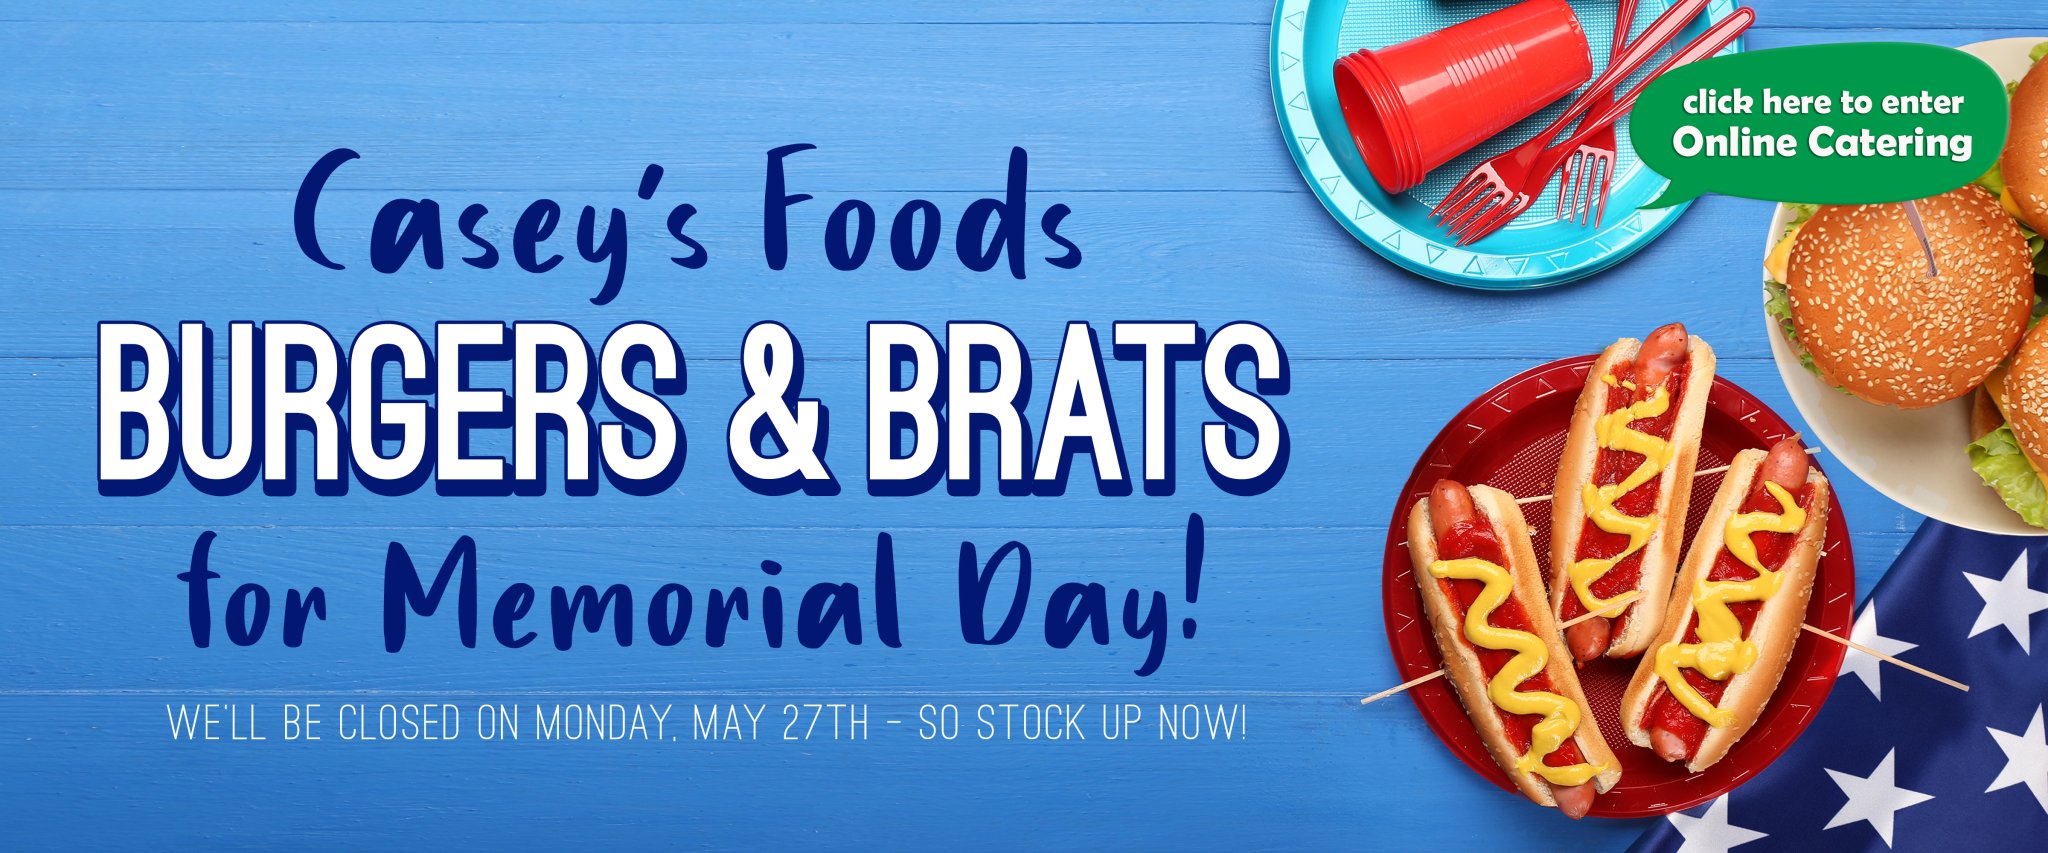 Pick up some famous Casey's Foods burgers & brats for Memorial Day!